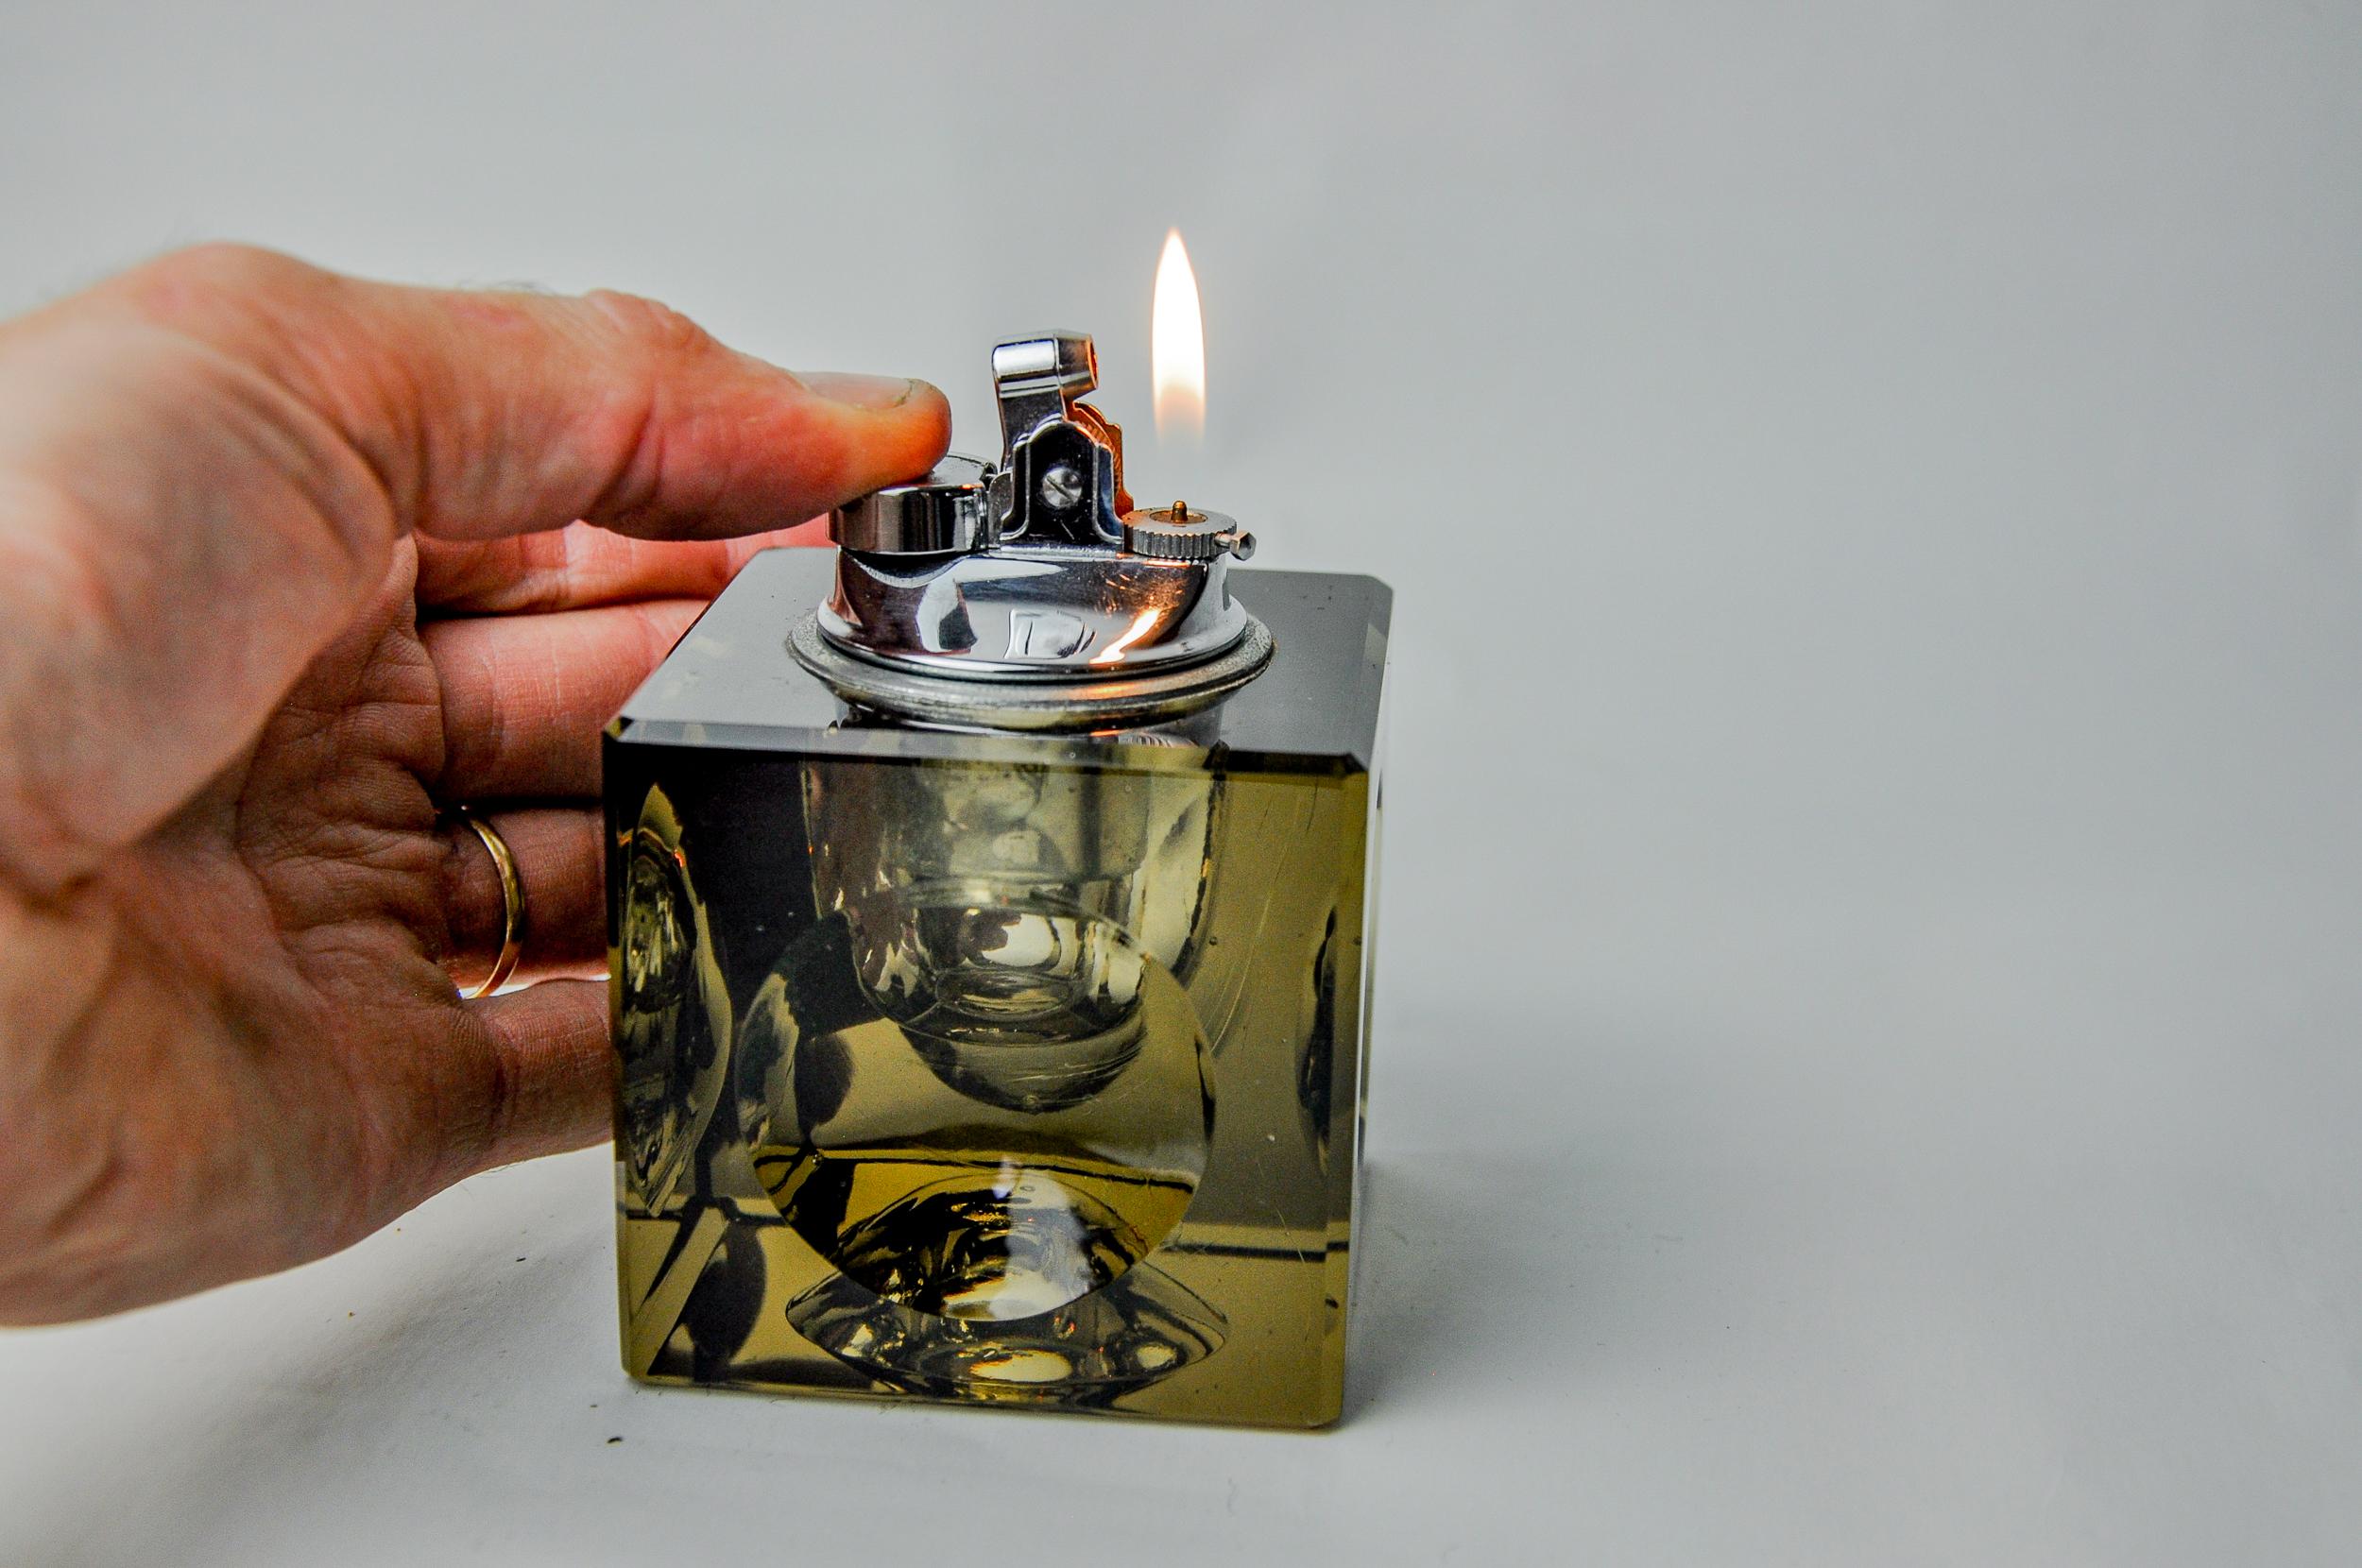 Superb and rare magnifying lighter designed and produced by antonio imperatore in italy in the 1970s. Black murano glass lighter handcrafted by venetian master glassmakers. Decorative object that will bring a real design touch to your interior.